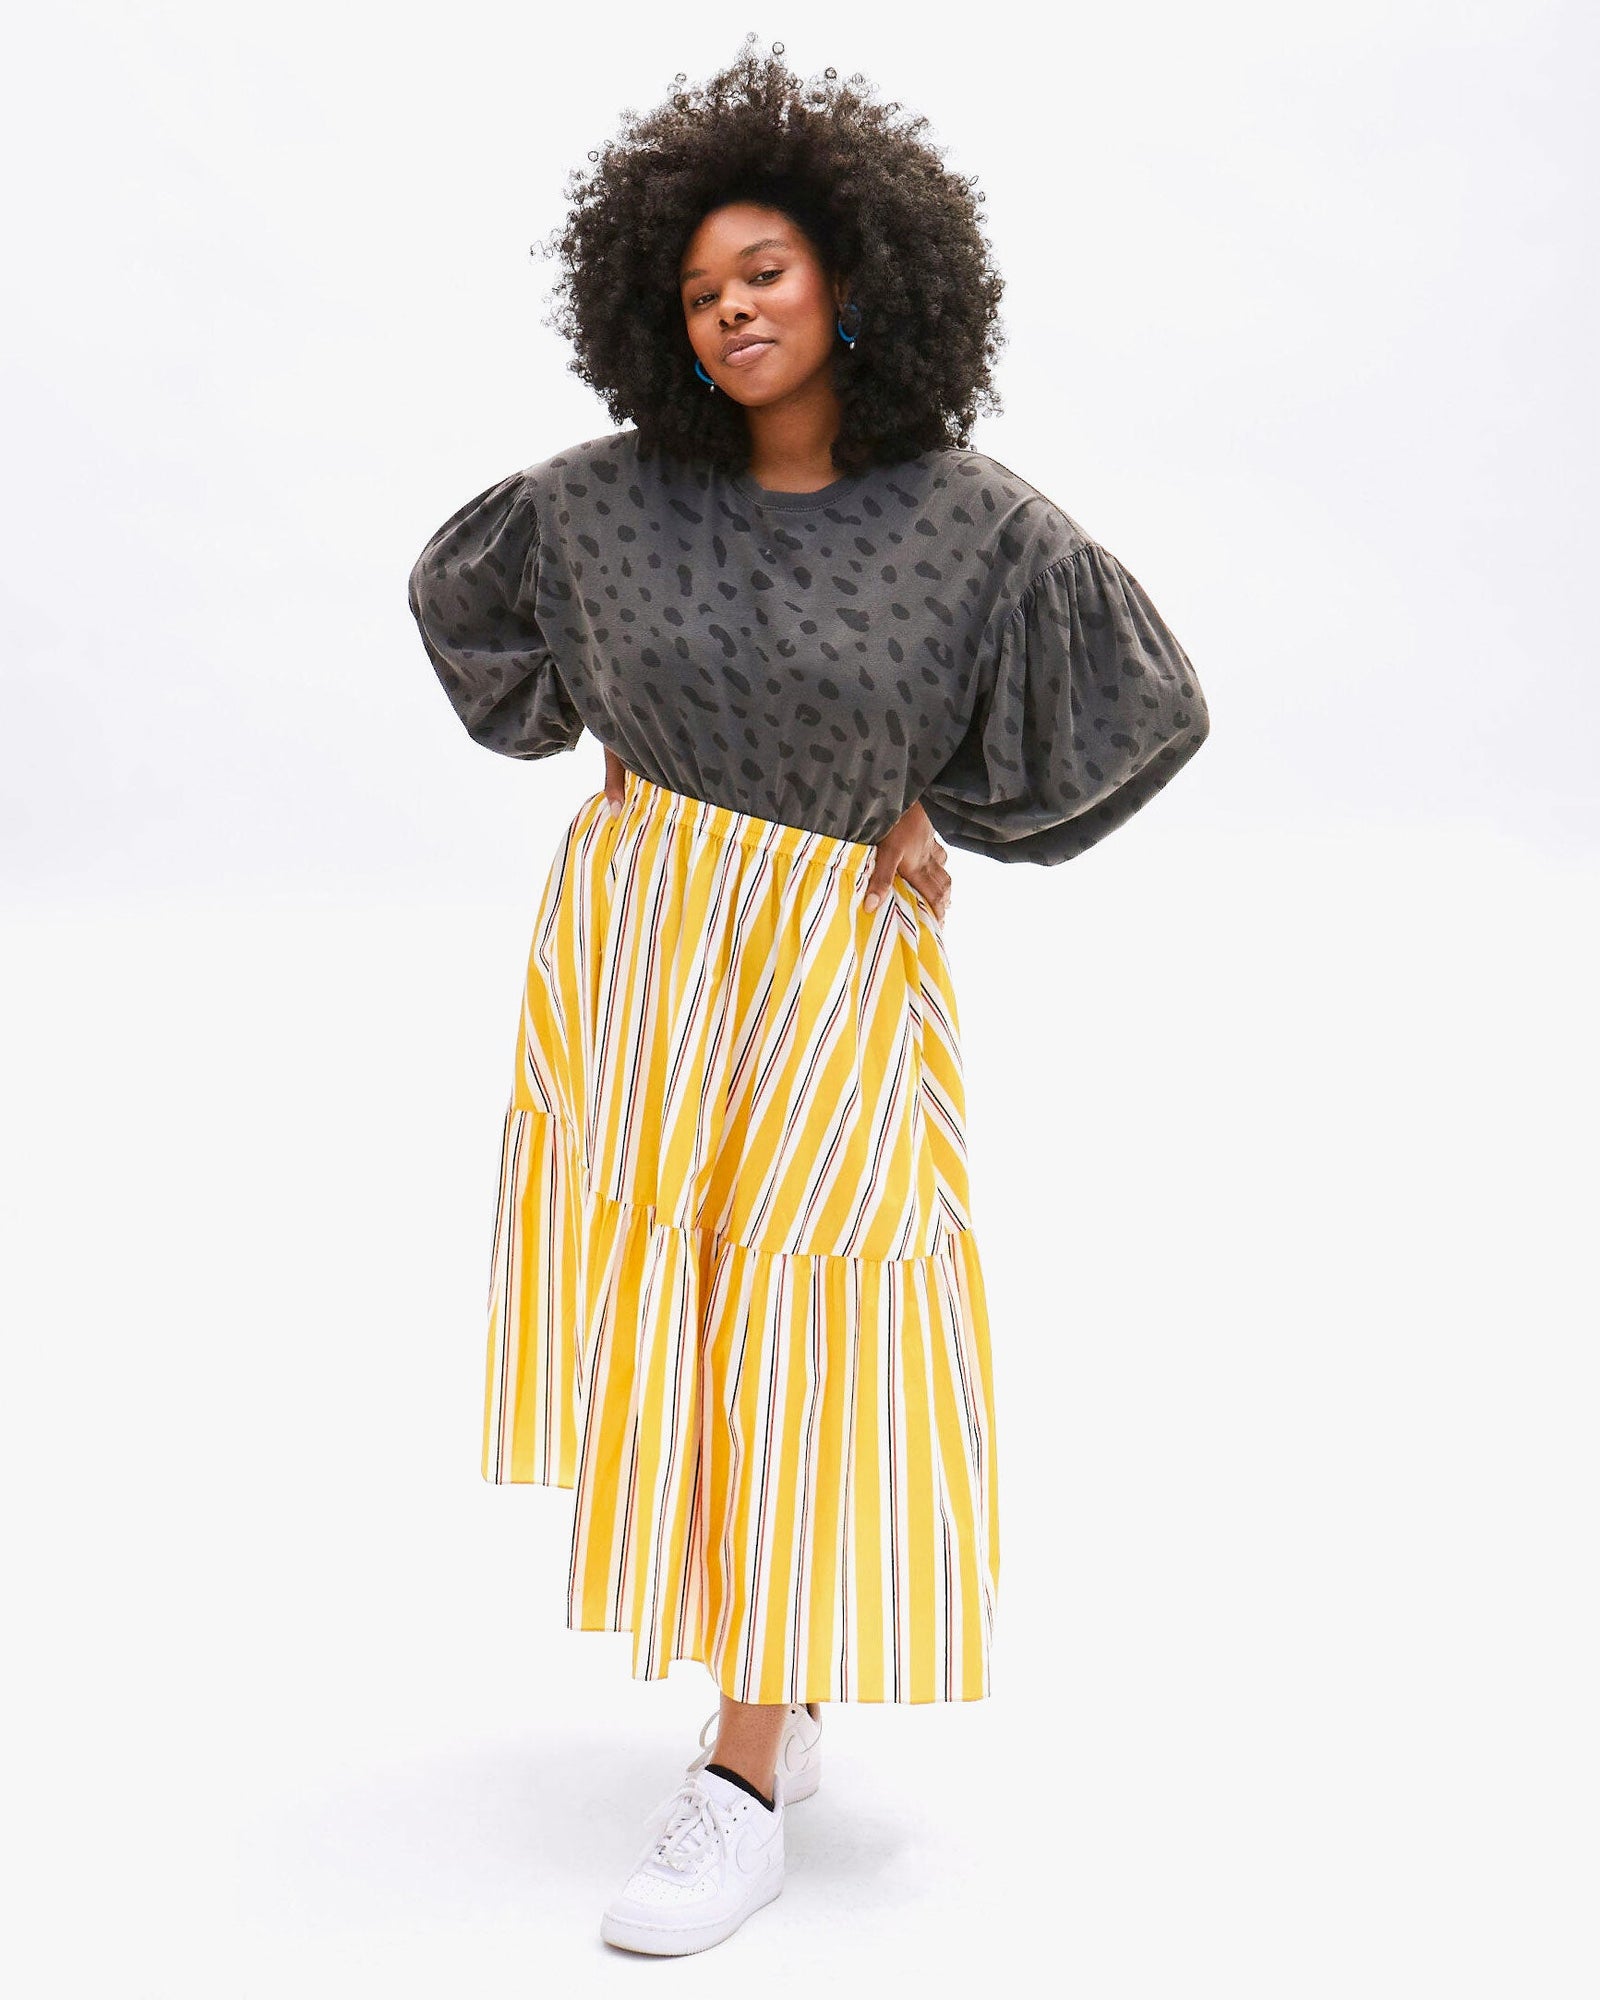 Candace wearing the Faded Black Jag Drop Shoulder Tee with the Marigold Multi Pinstripe Manon Skirt